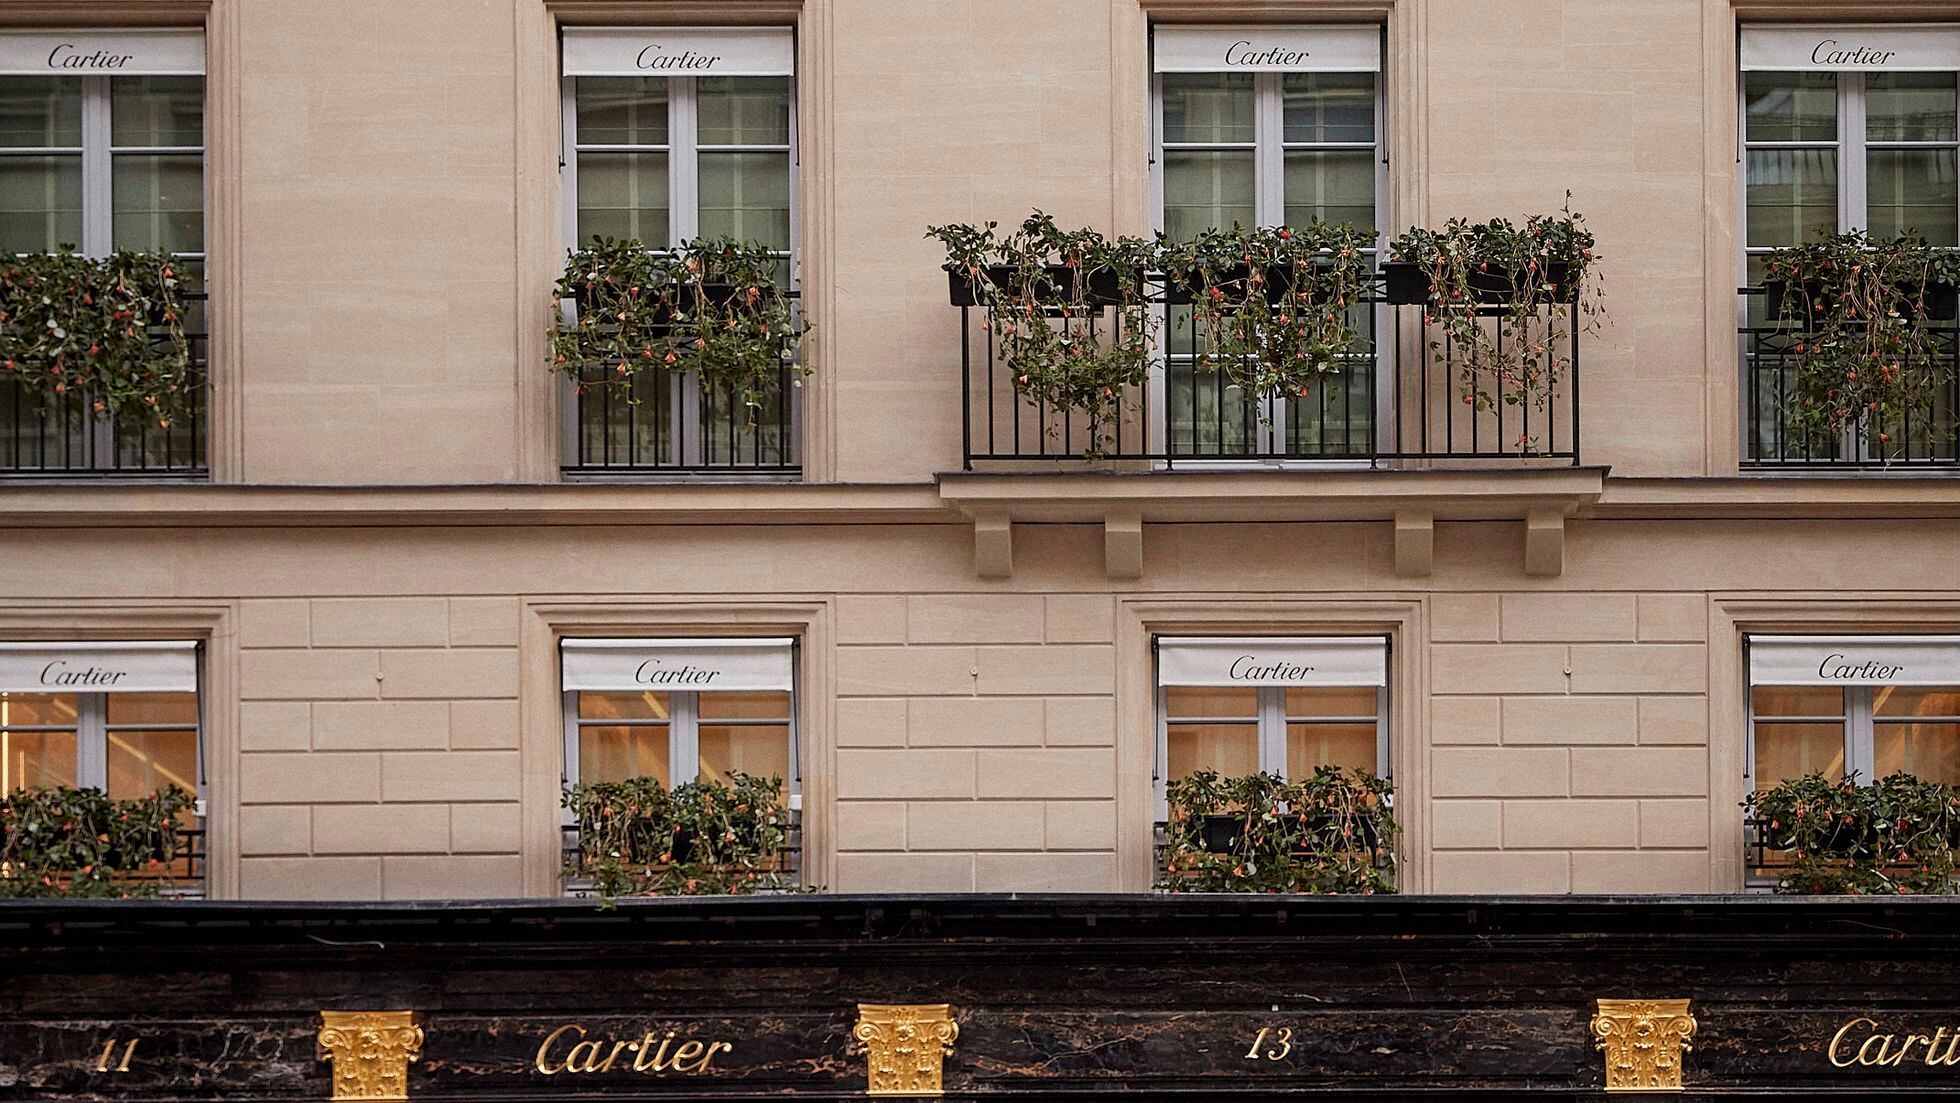 Cartier to Reopen Its Paris Home - The New York Times